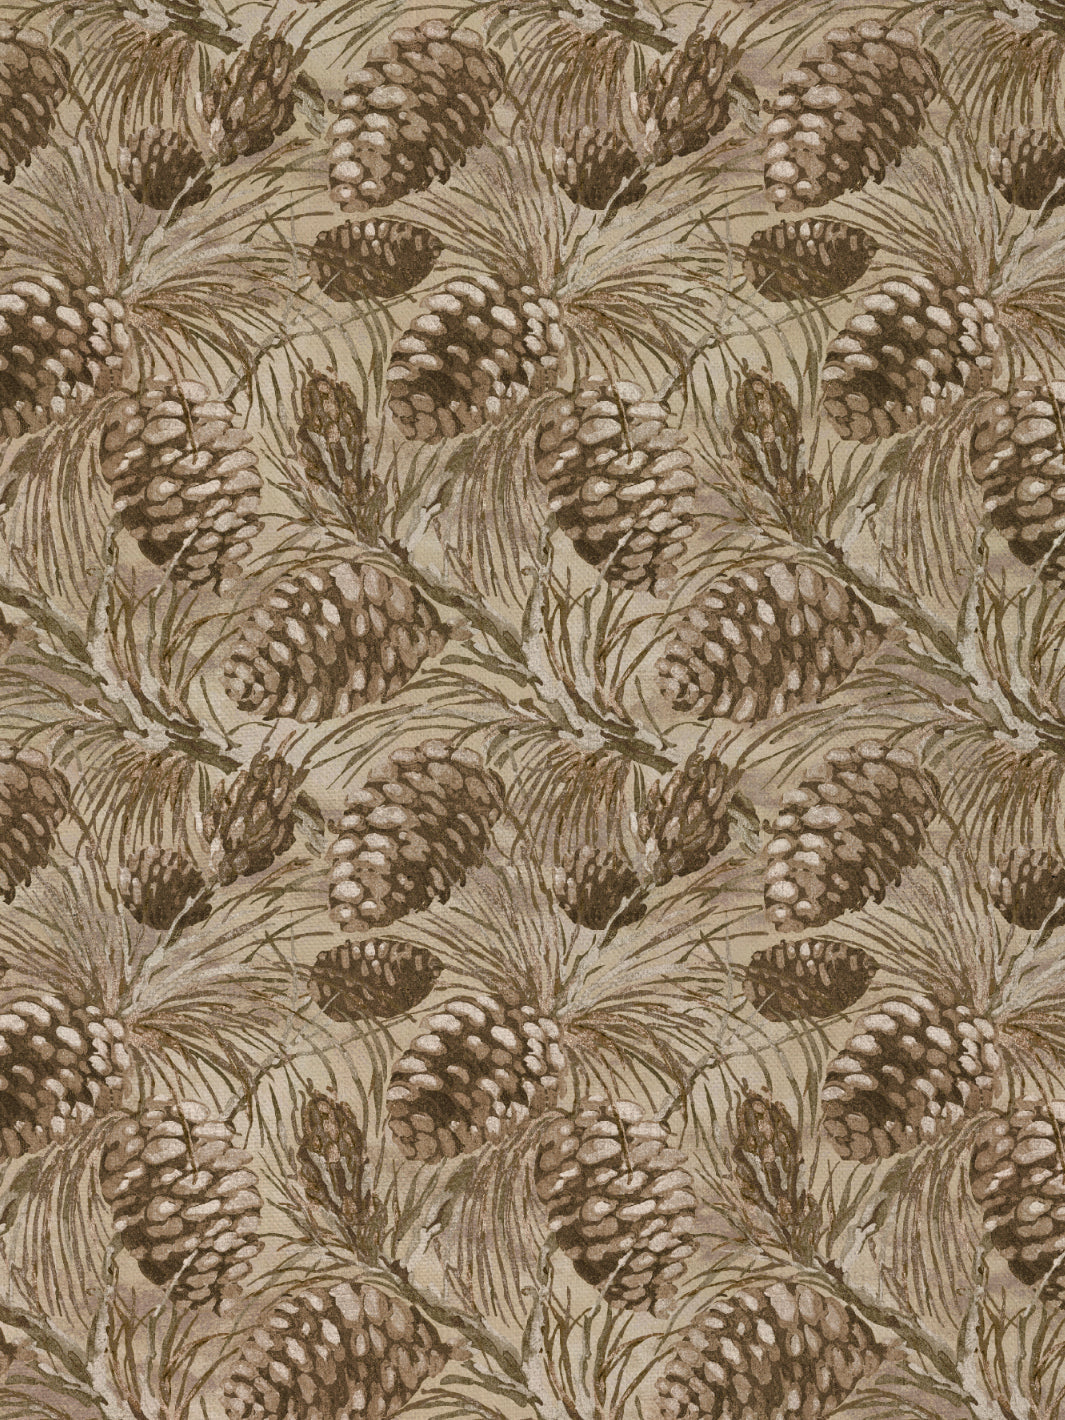 'Pinecones' Linen Fabric by Nathan Turner - Beige